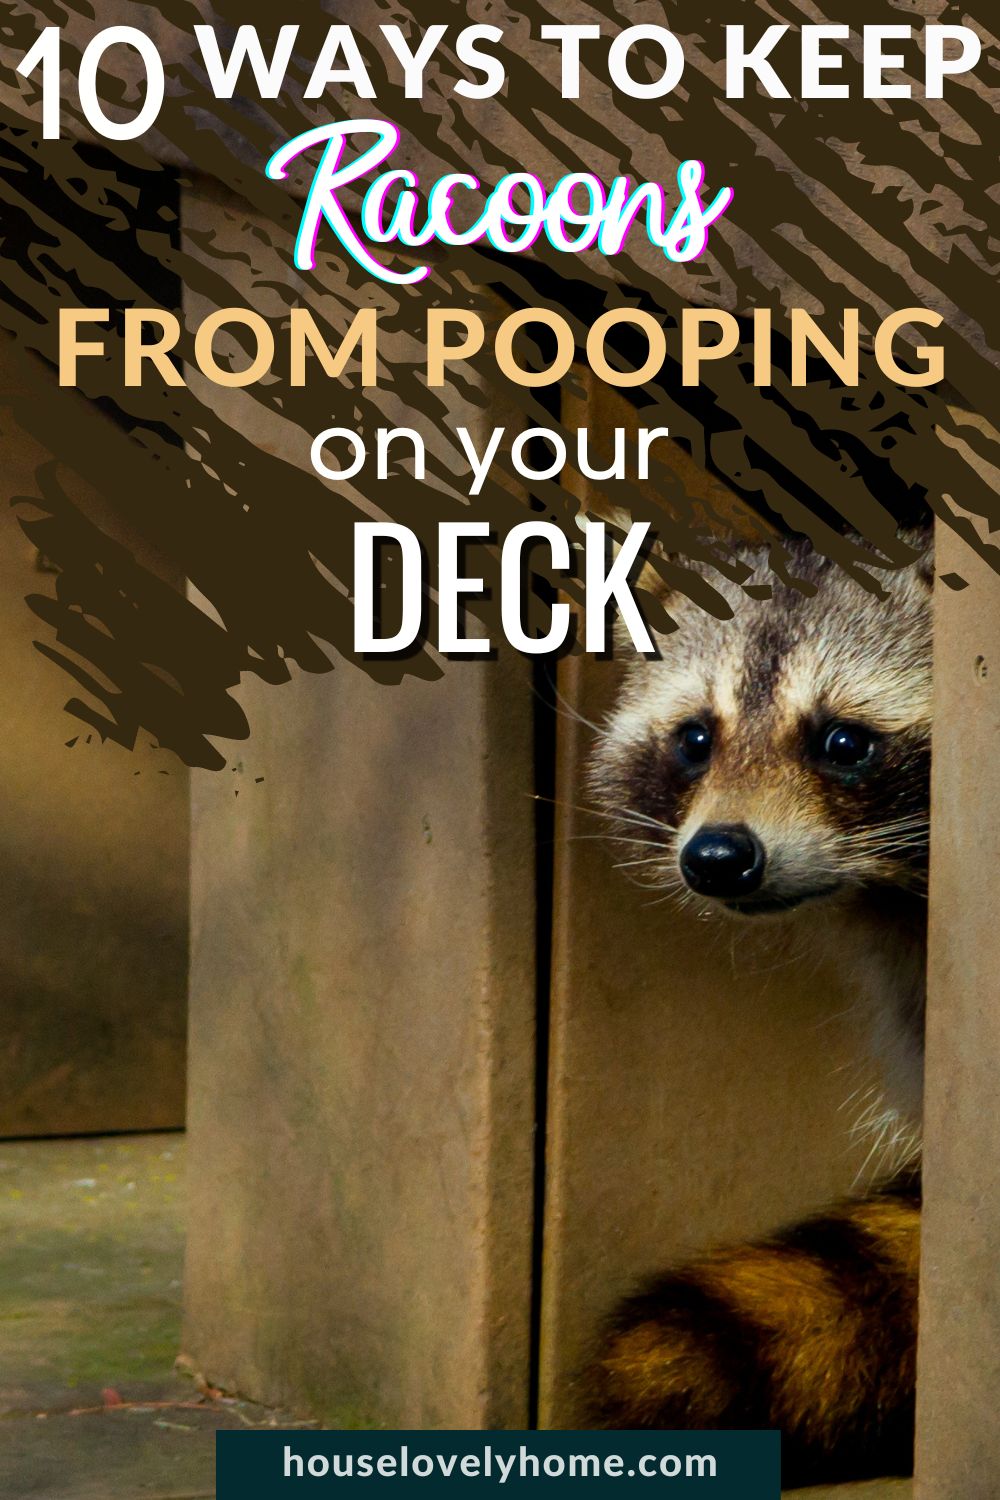 A racoon hiding under a deck with text overlays that read 10 Ways to Keep Raccoons From Pooping on Your Deck